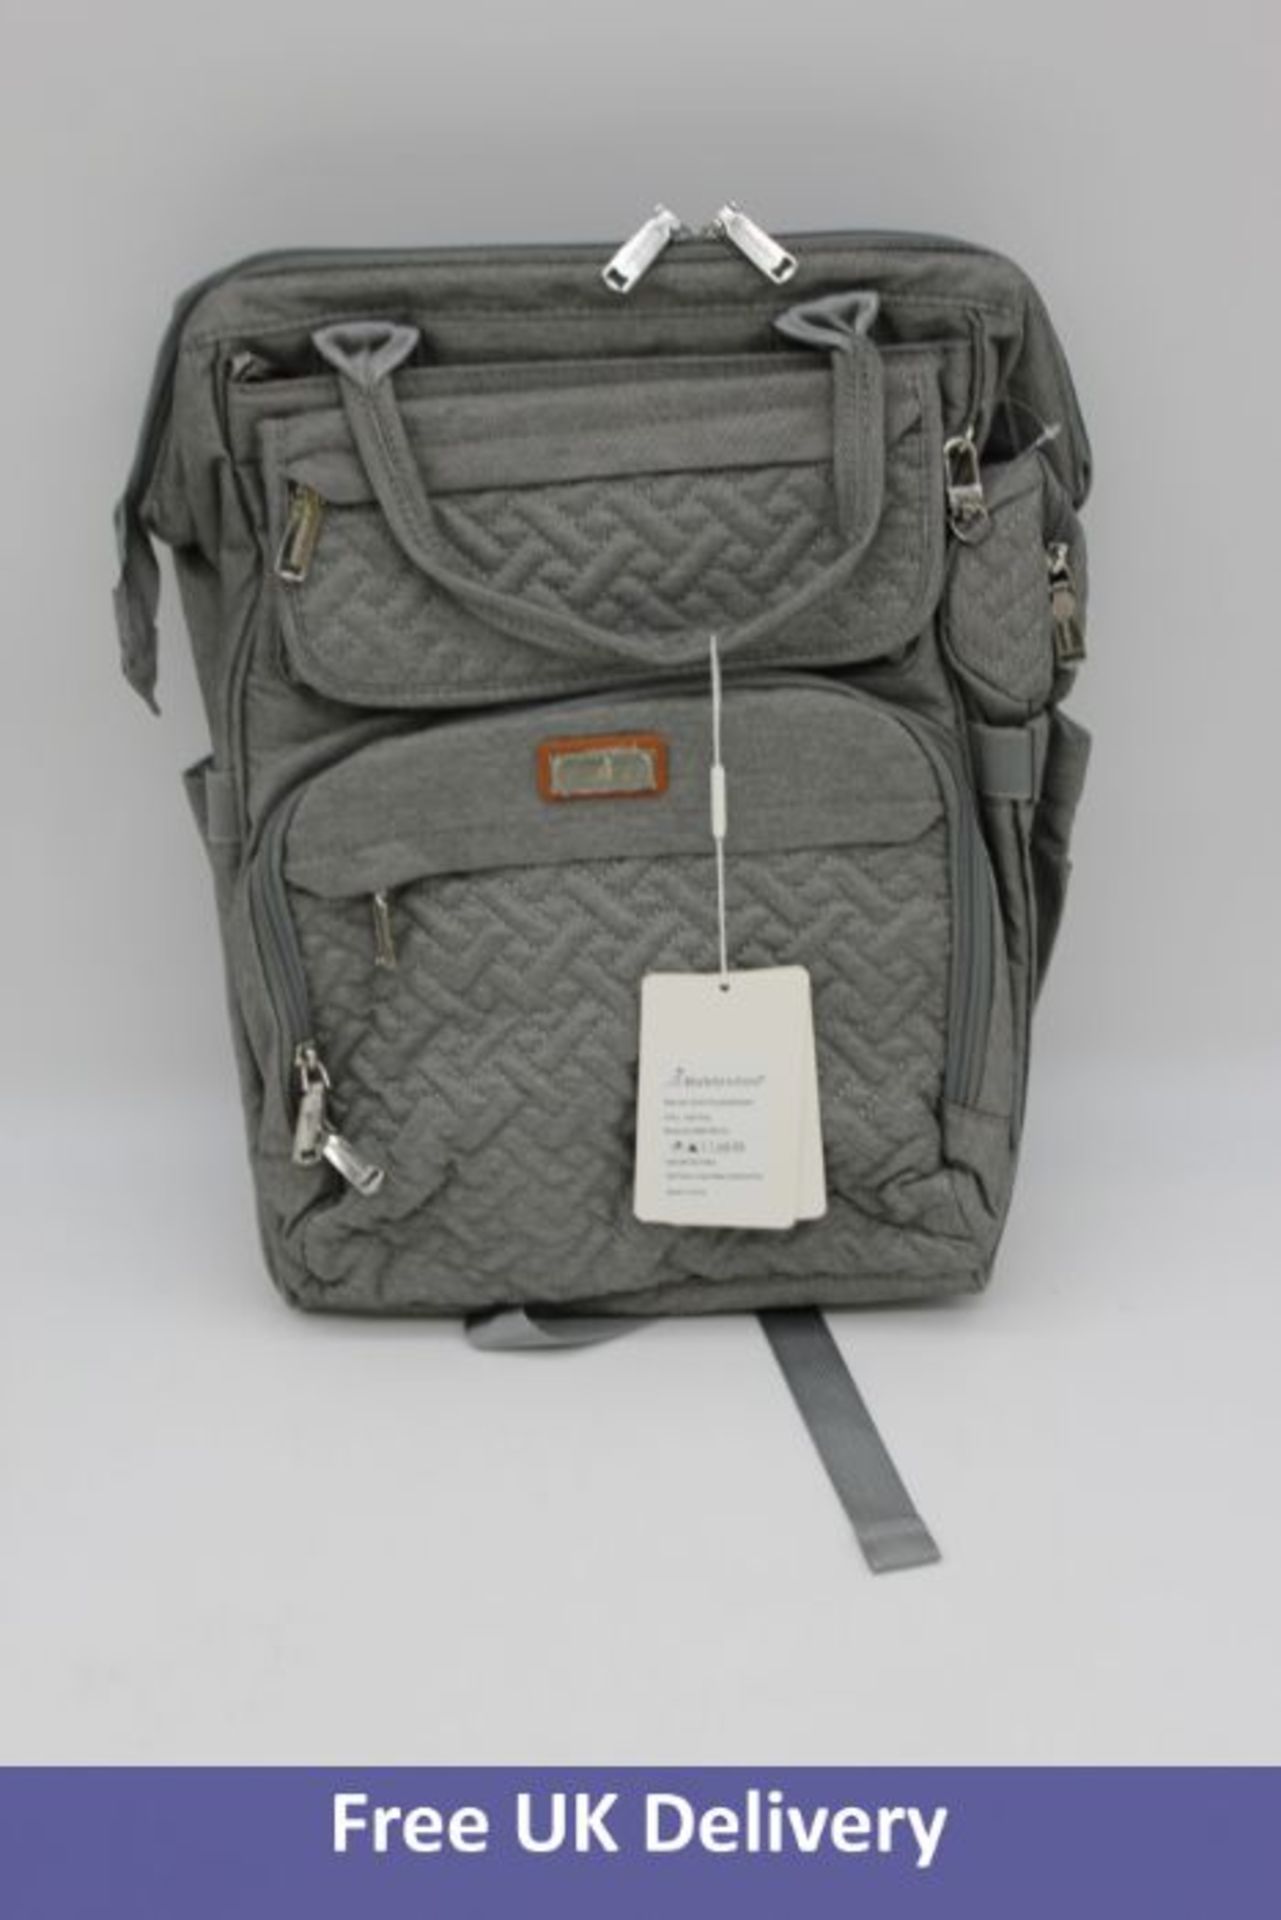 Five BabbleRoo Nappy Changing Back Pack, Diaper Bags with Changing Mat, Pacifier Holder for Mom & Da - Image 2 of 3